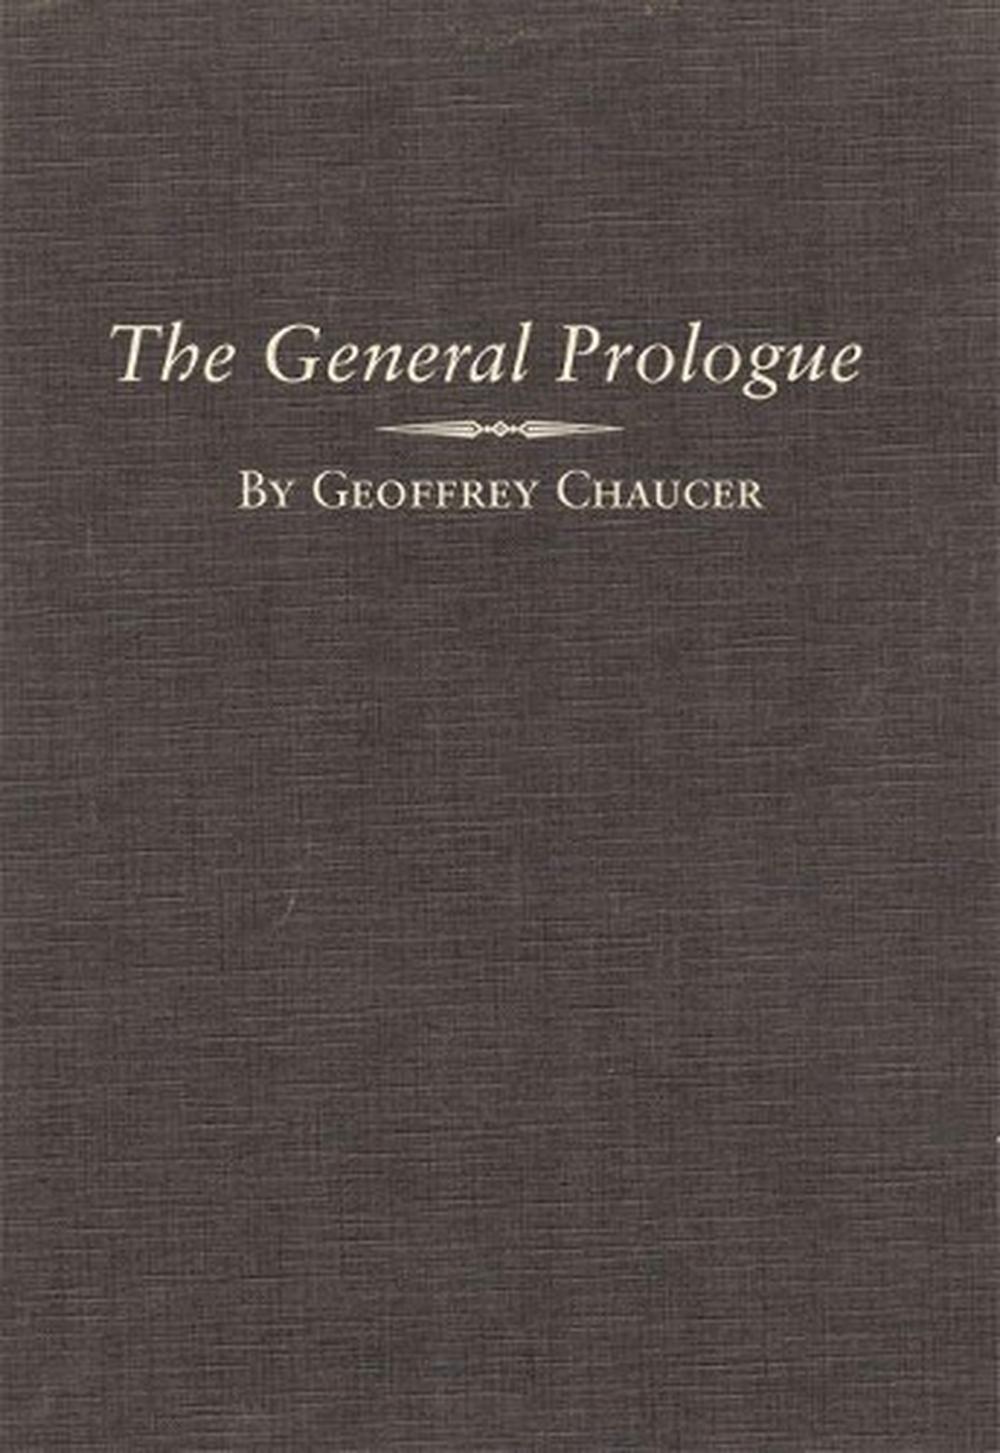 chaucer the general prologue